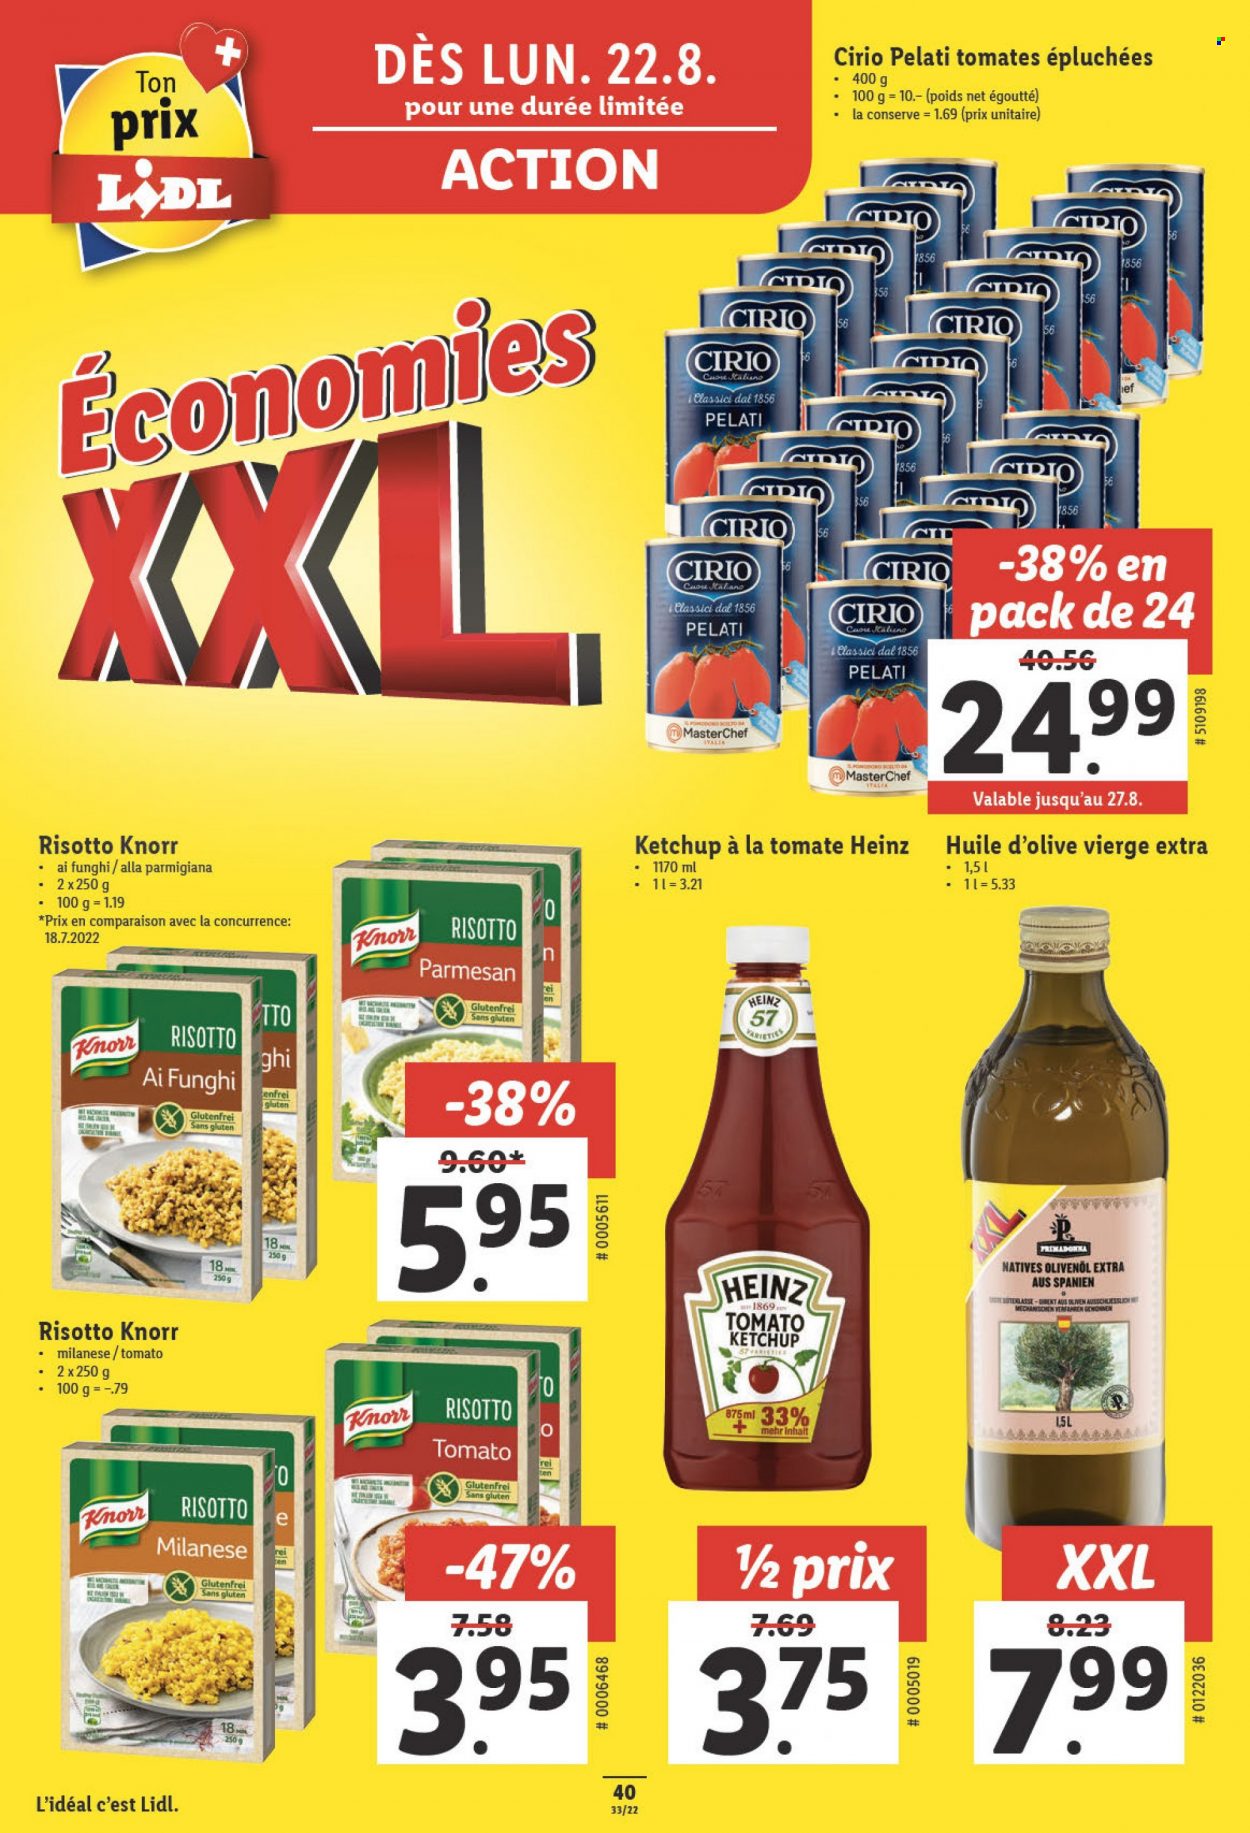 Catalogue Lidl - 18.8.2022 - 24.8.2022. Page 40.